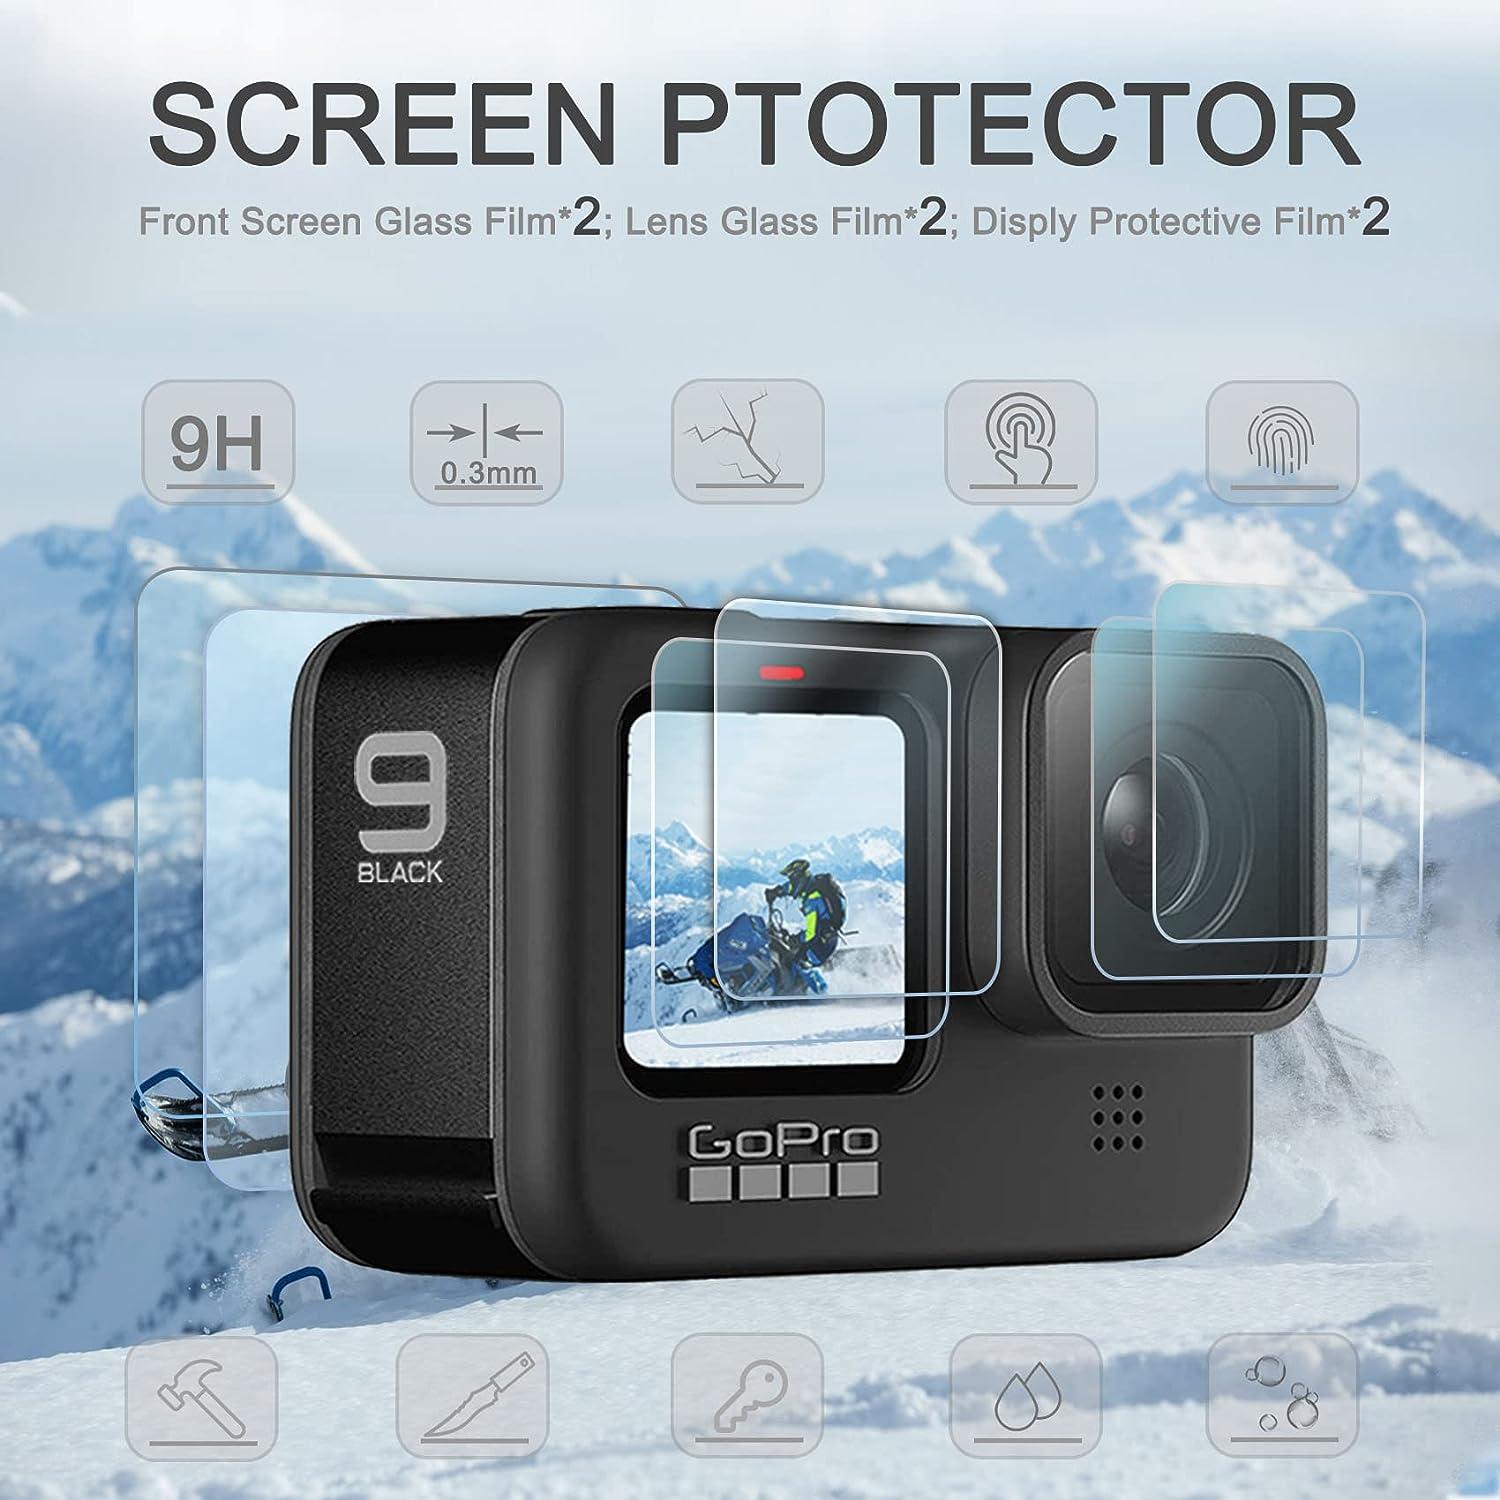 Accessories Kit for GoPro Hero 12 / Hero 11 / Hero 10 / Hero 9 Black with  Shockproof Small Case + Waterproof Case + Tempered Glass Screen Protector +  Silicone Cover + Lens Filters + Anti-Fog Inserts 